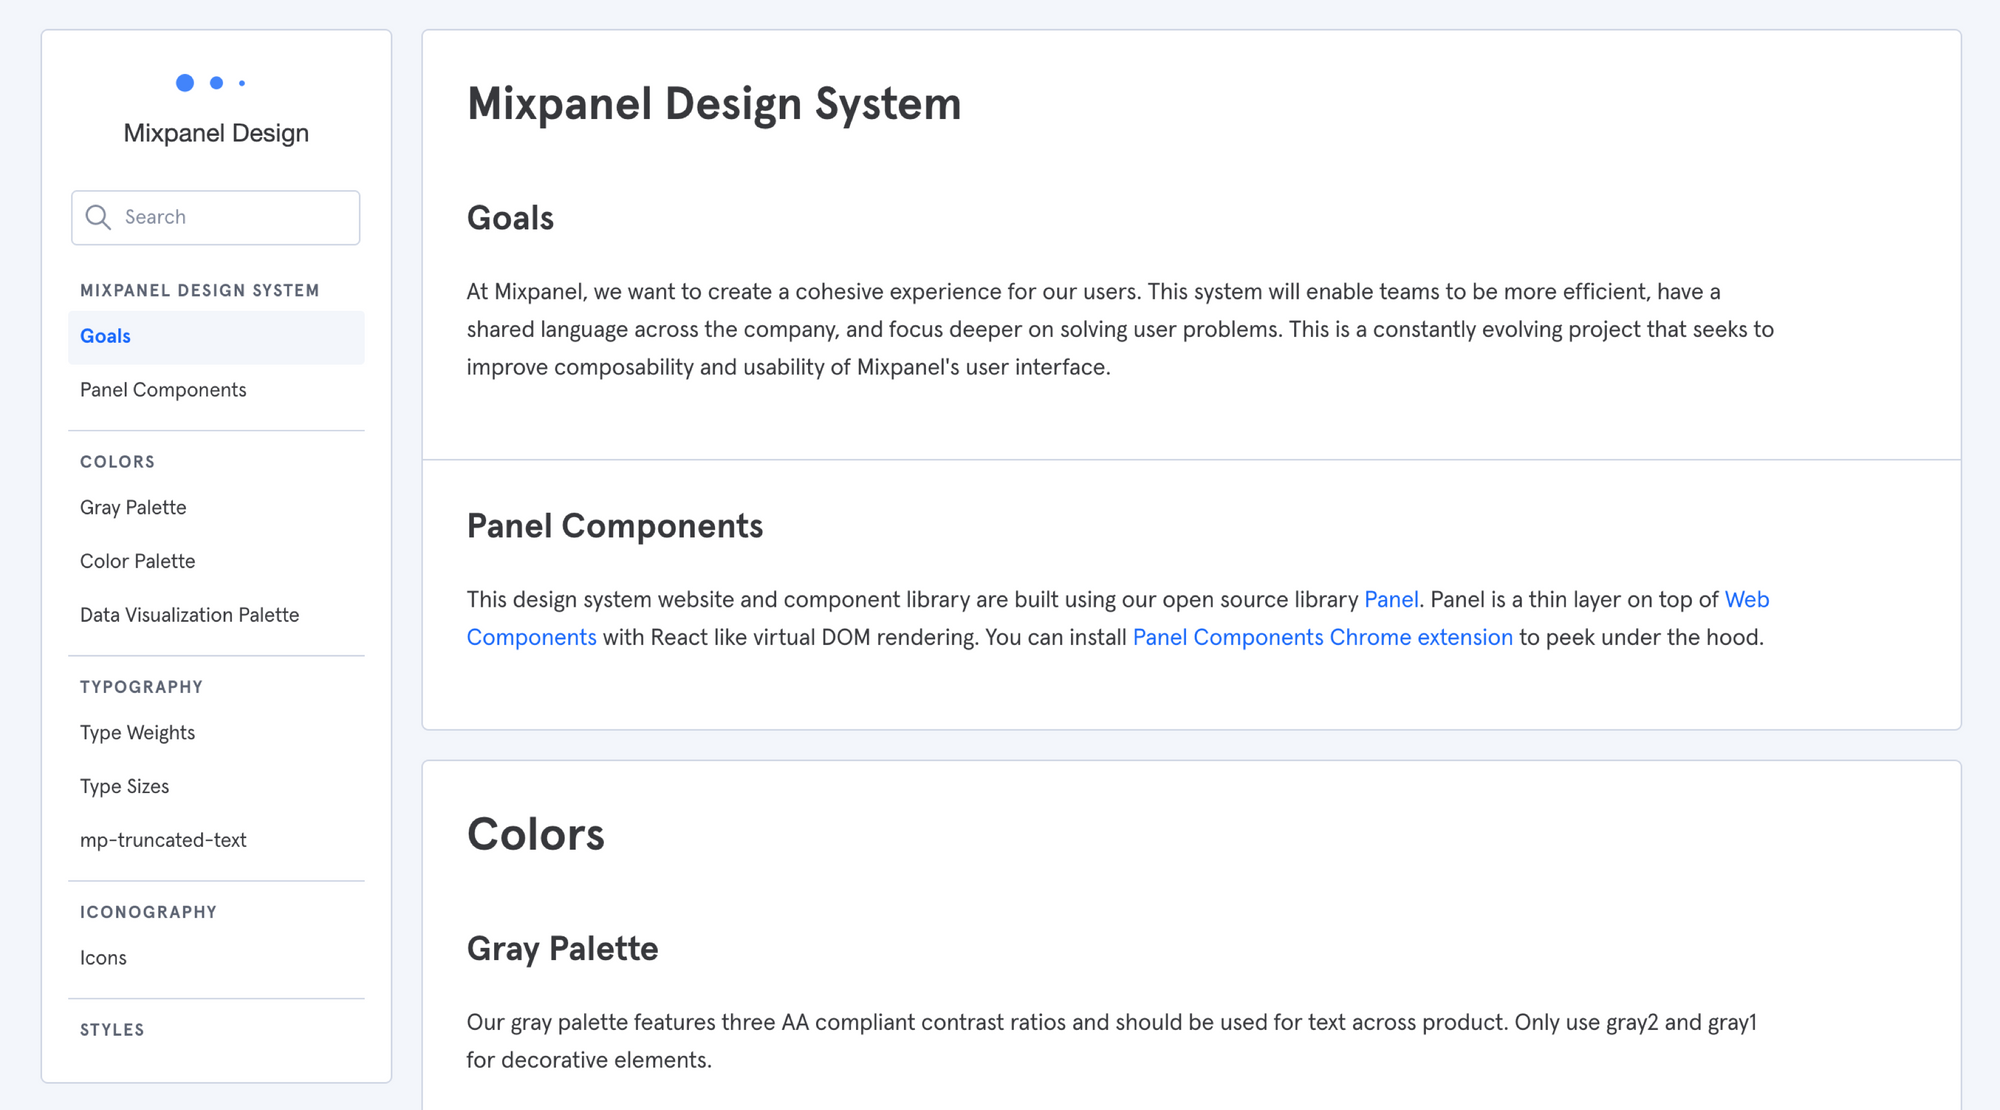 A screenshot of the Mixpanel Design System website which pulls from a Github repo.